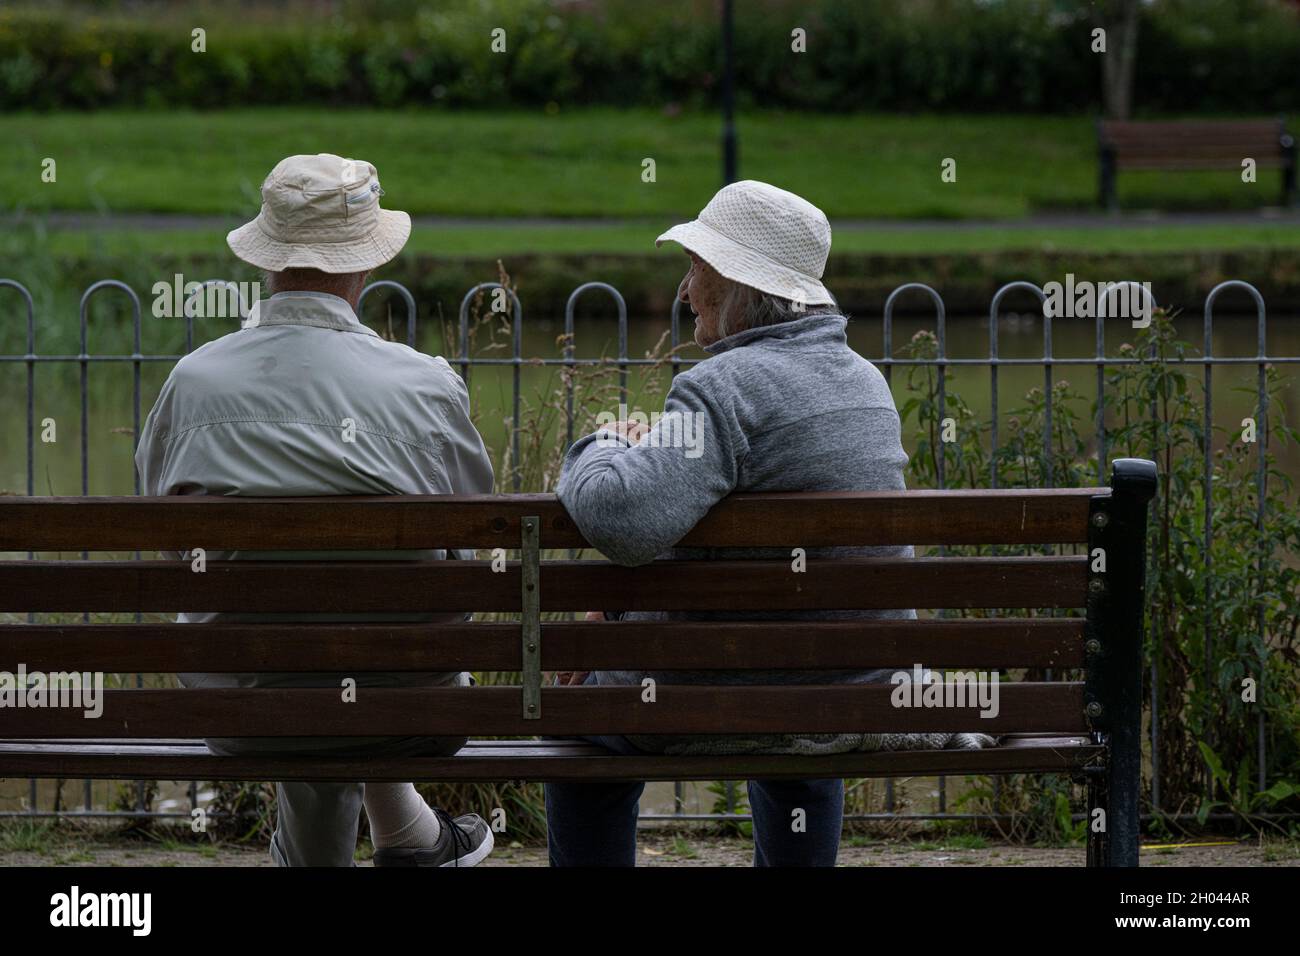 Two elderly male friends wearing sunhats and sitting on a bench chatting. Stock Photo